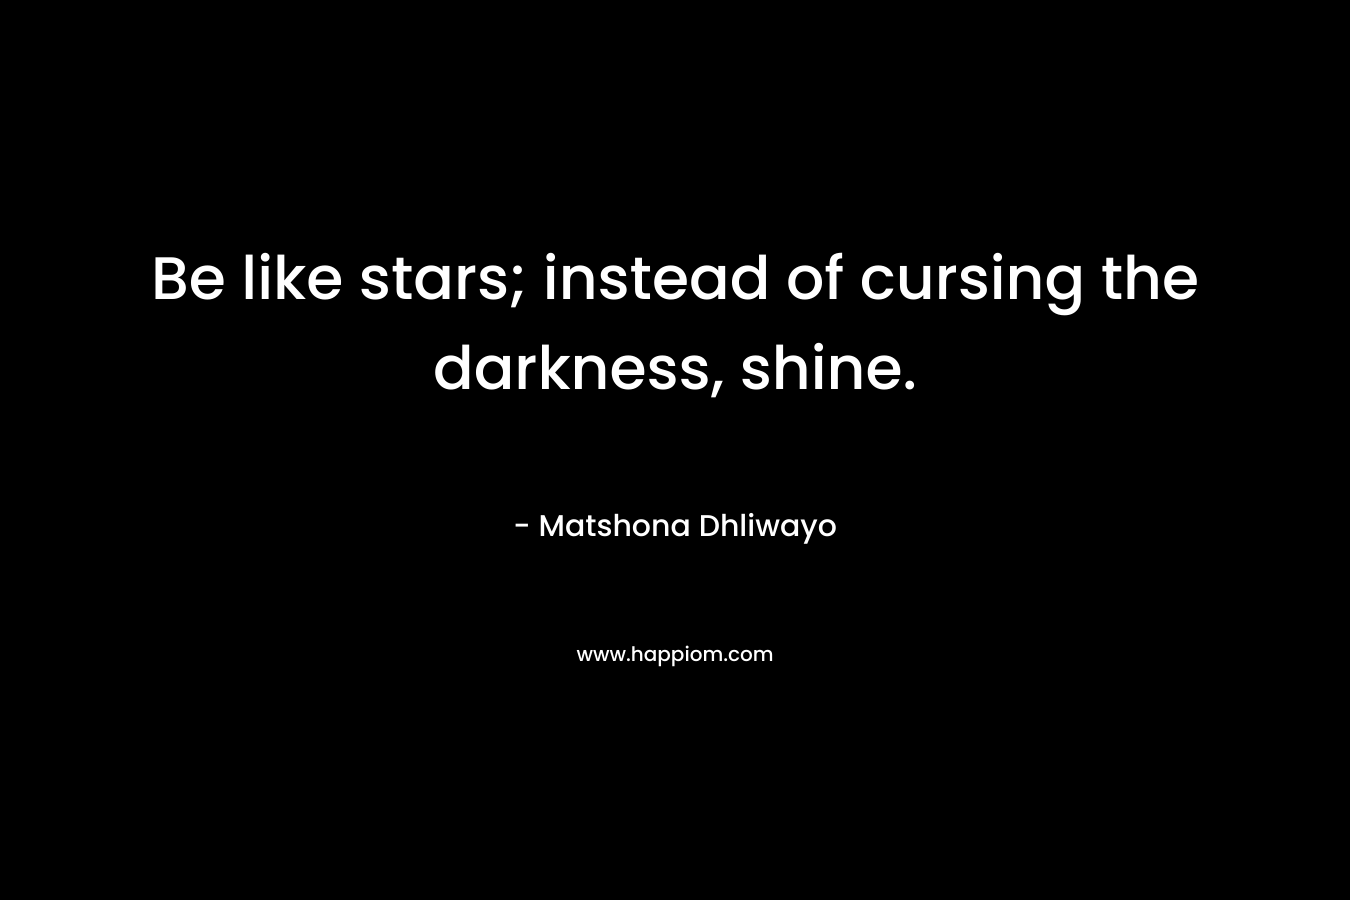 Be like stars; instead of cursing the darkness, shine.